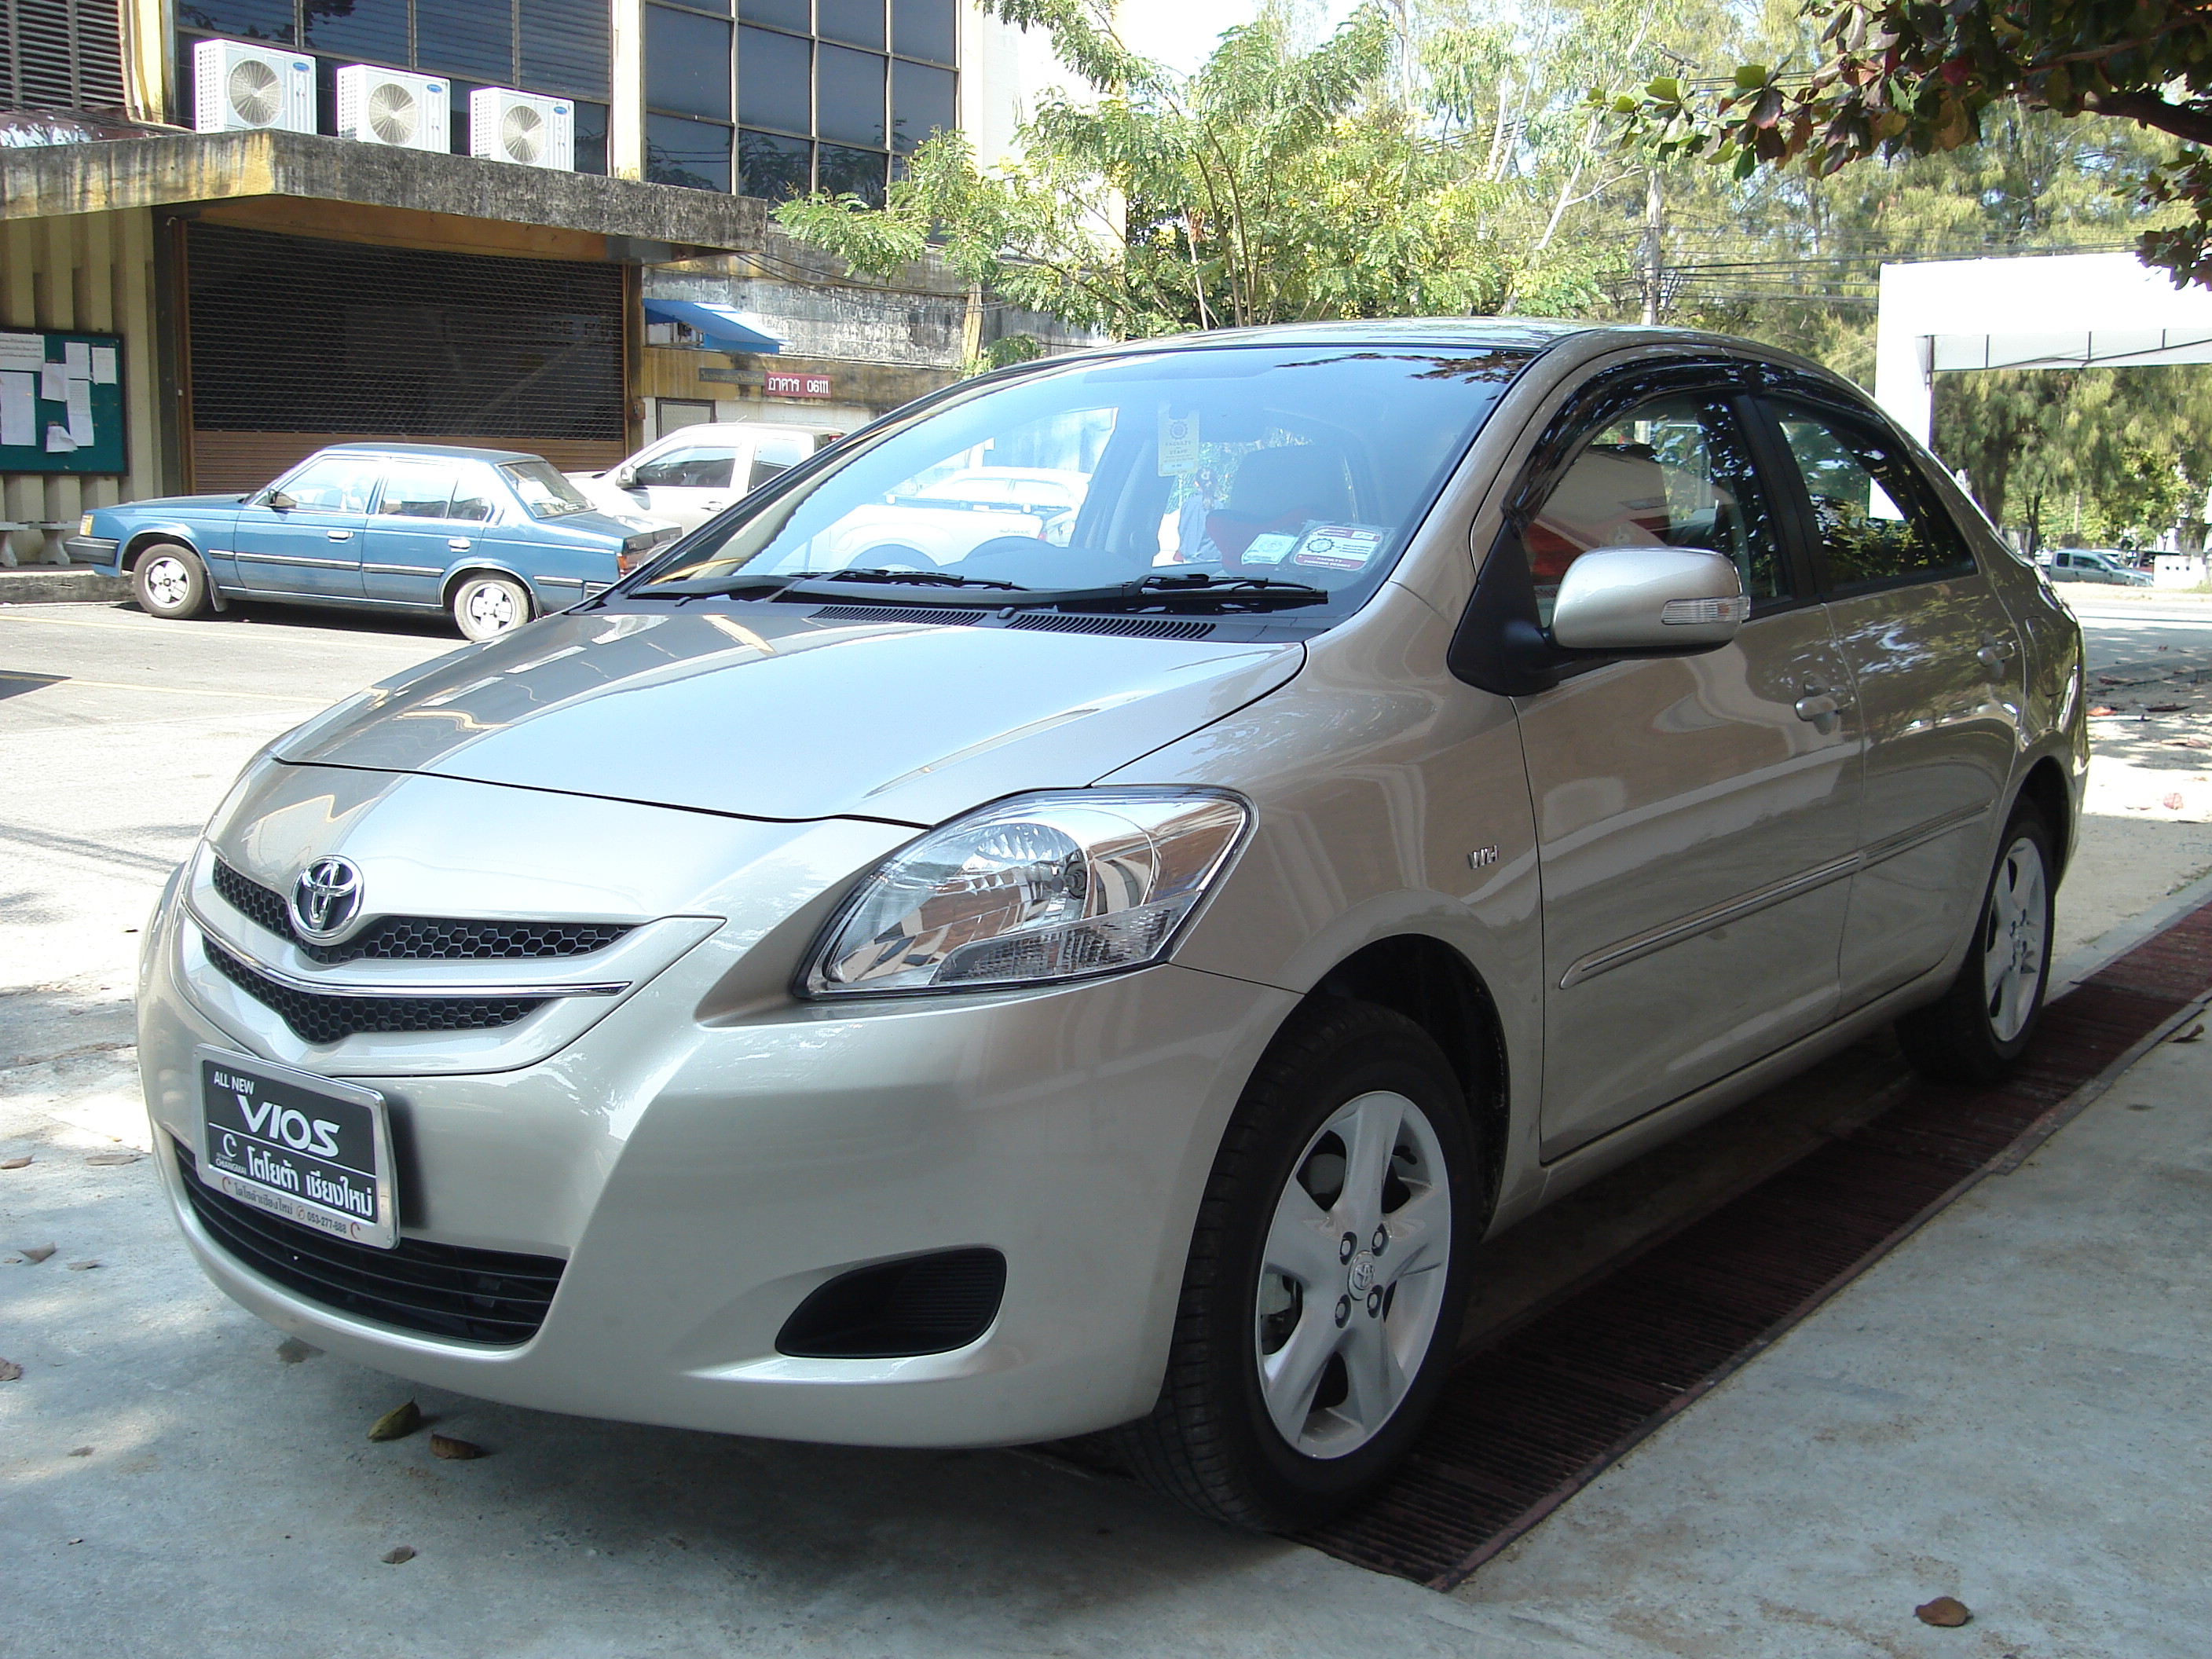 Toyota Vios 2008 Review Amazing Pictures and Images 